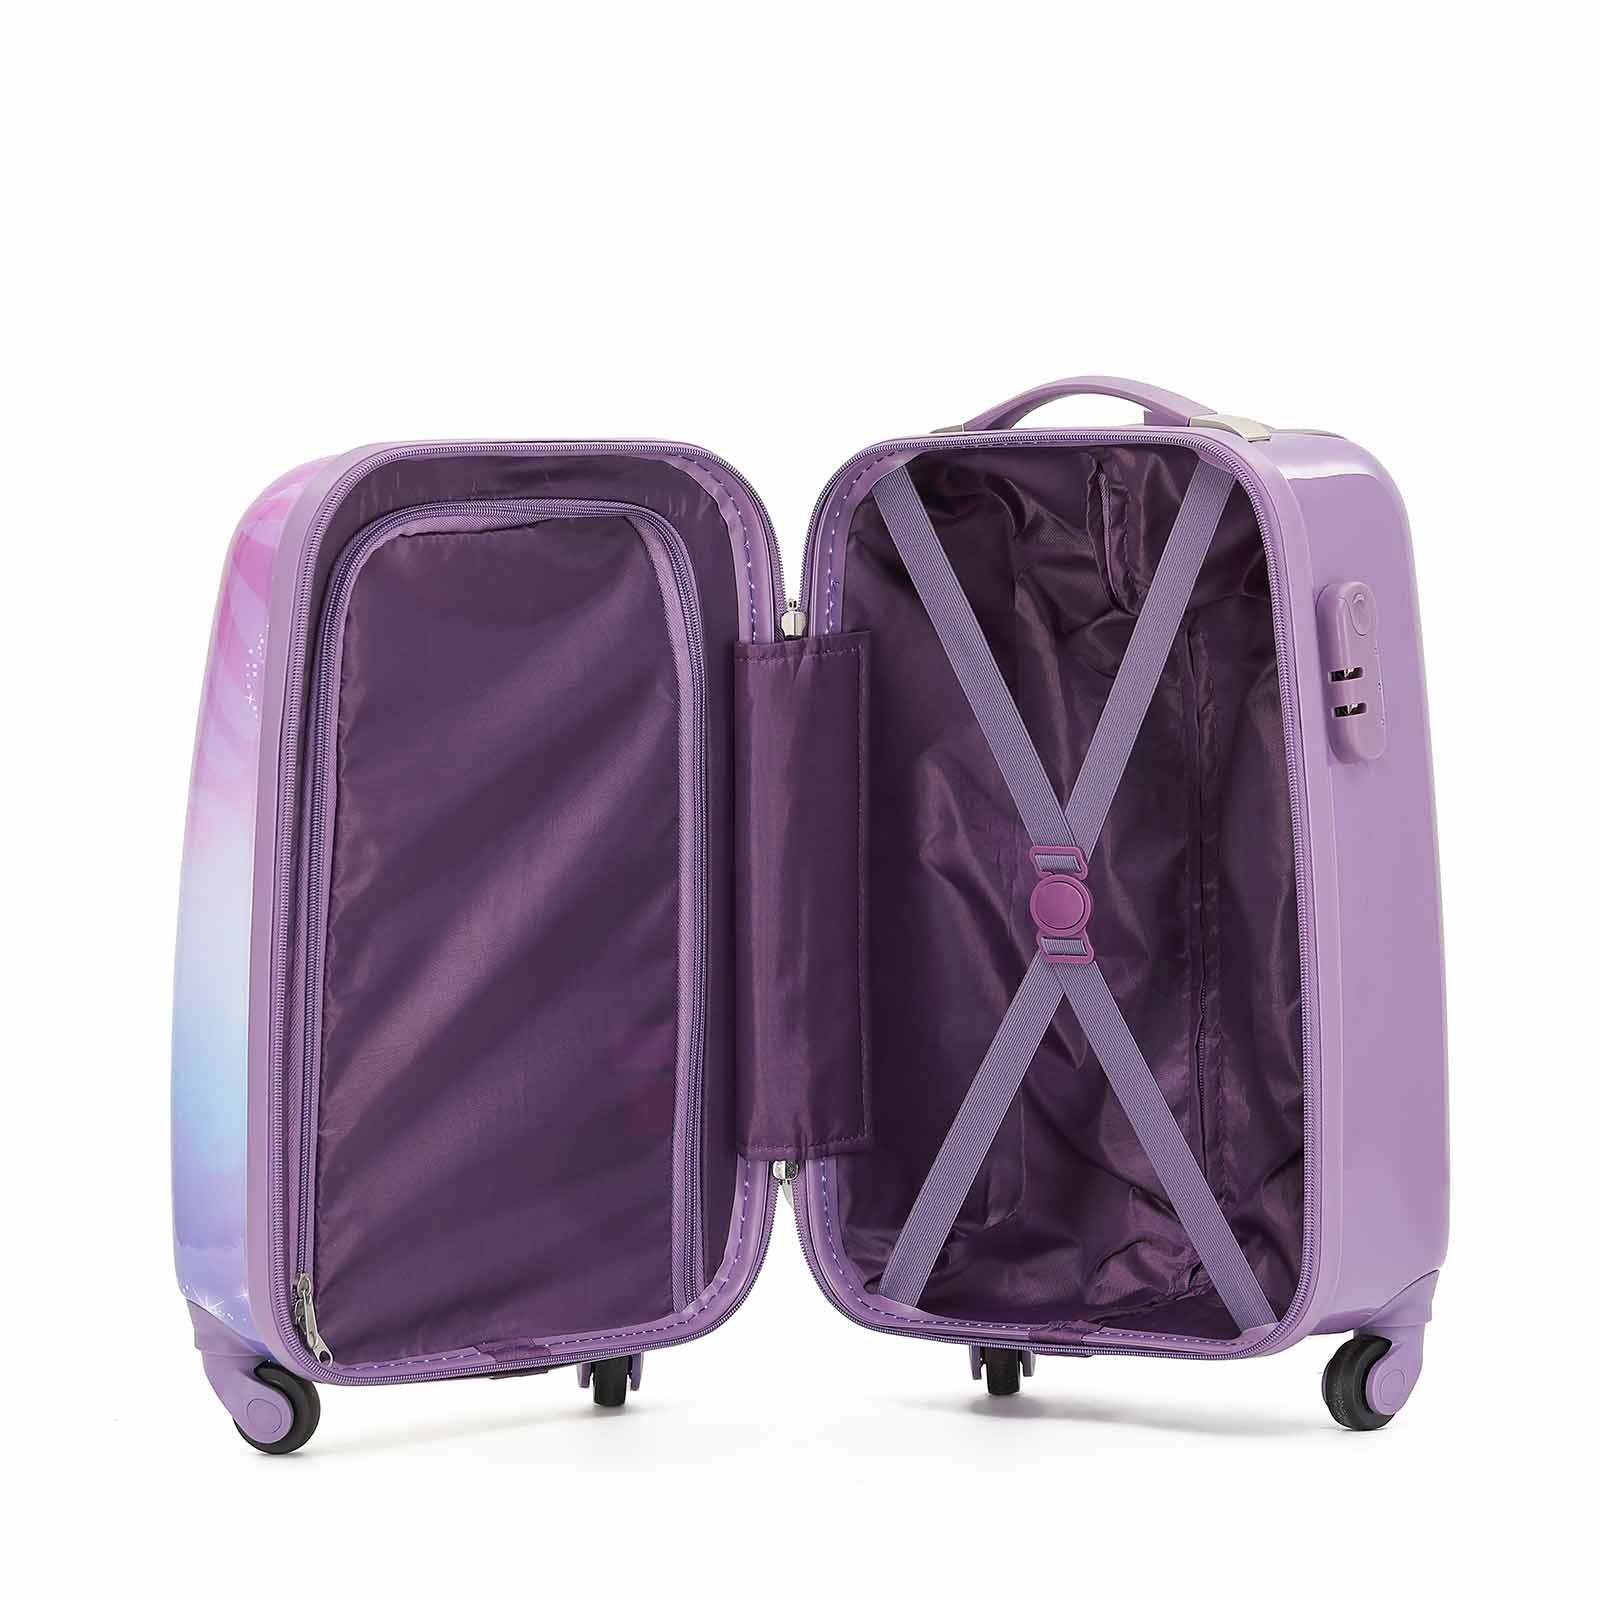 Disney Princess 17 Inch Carry-On Suitcase